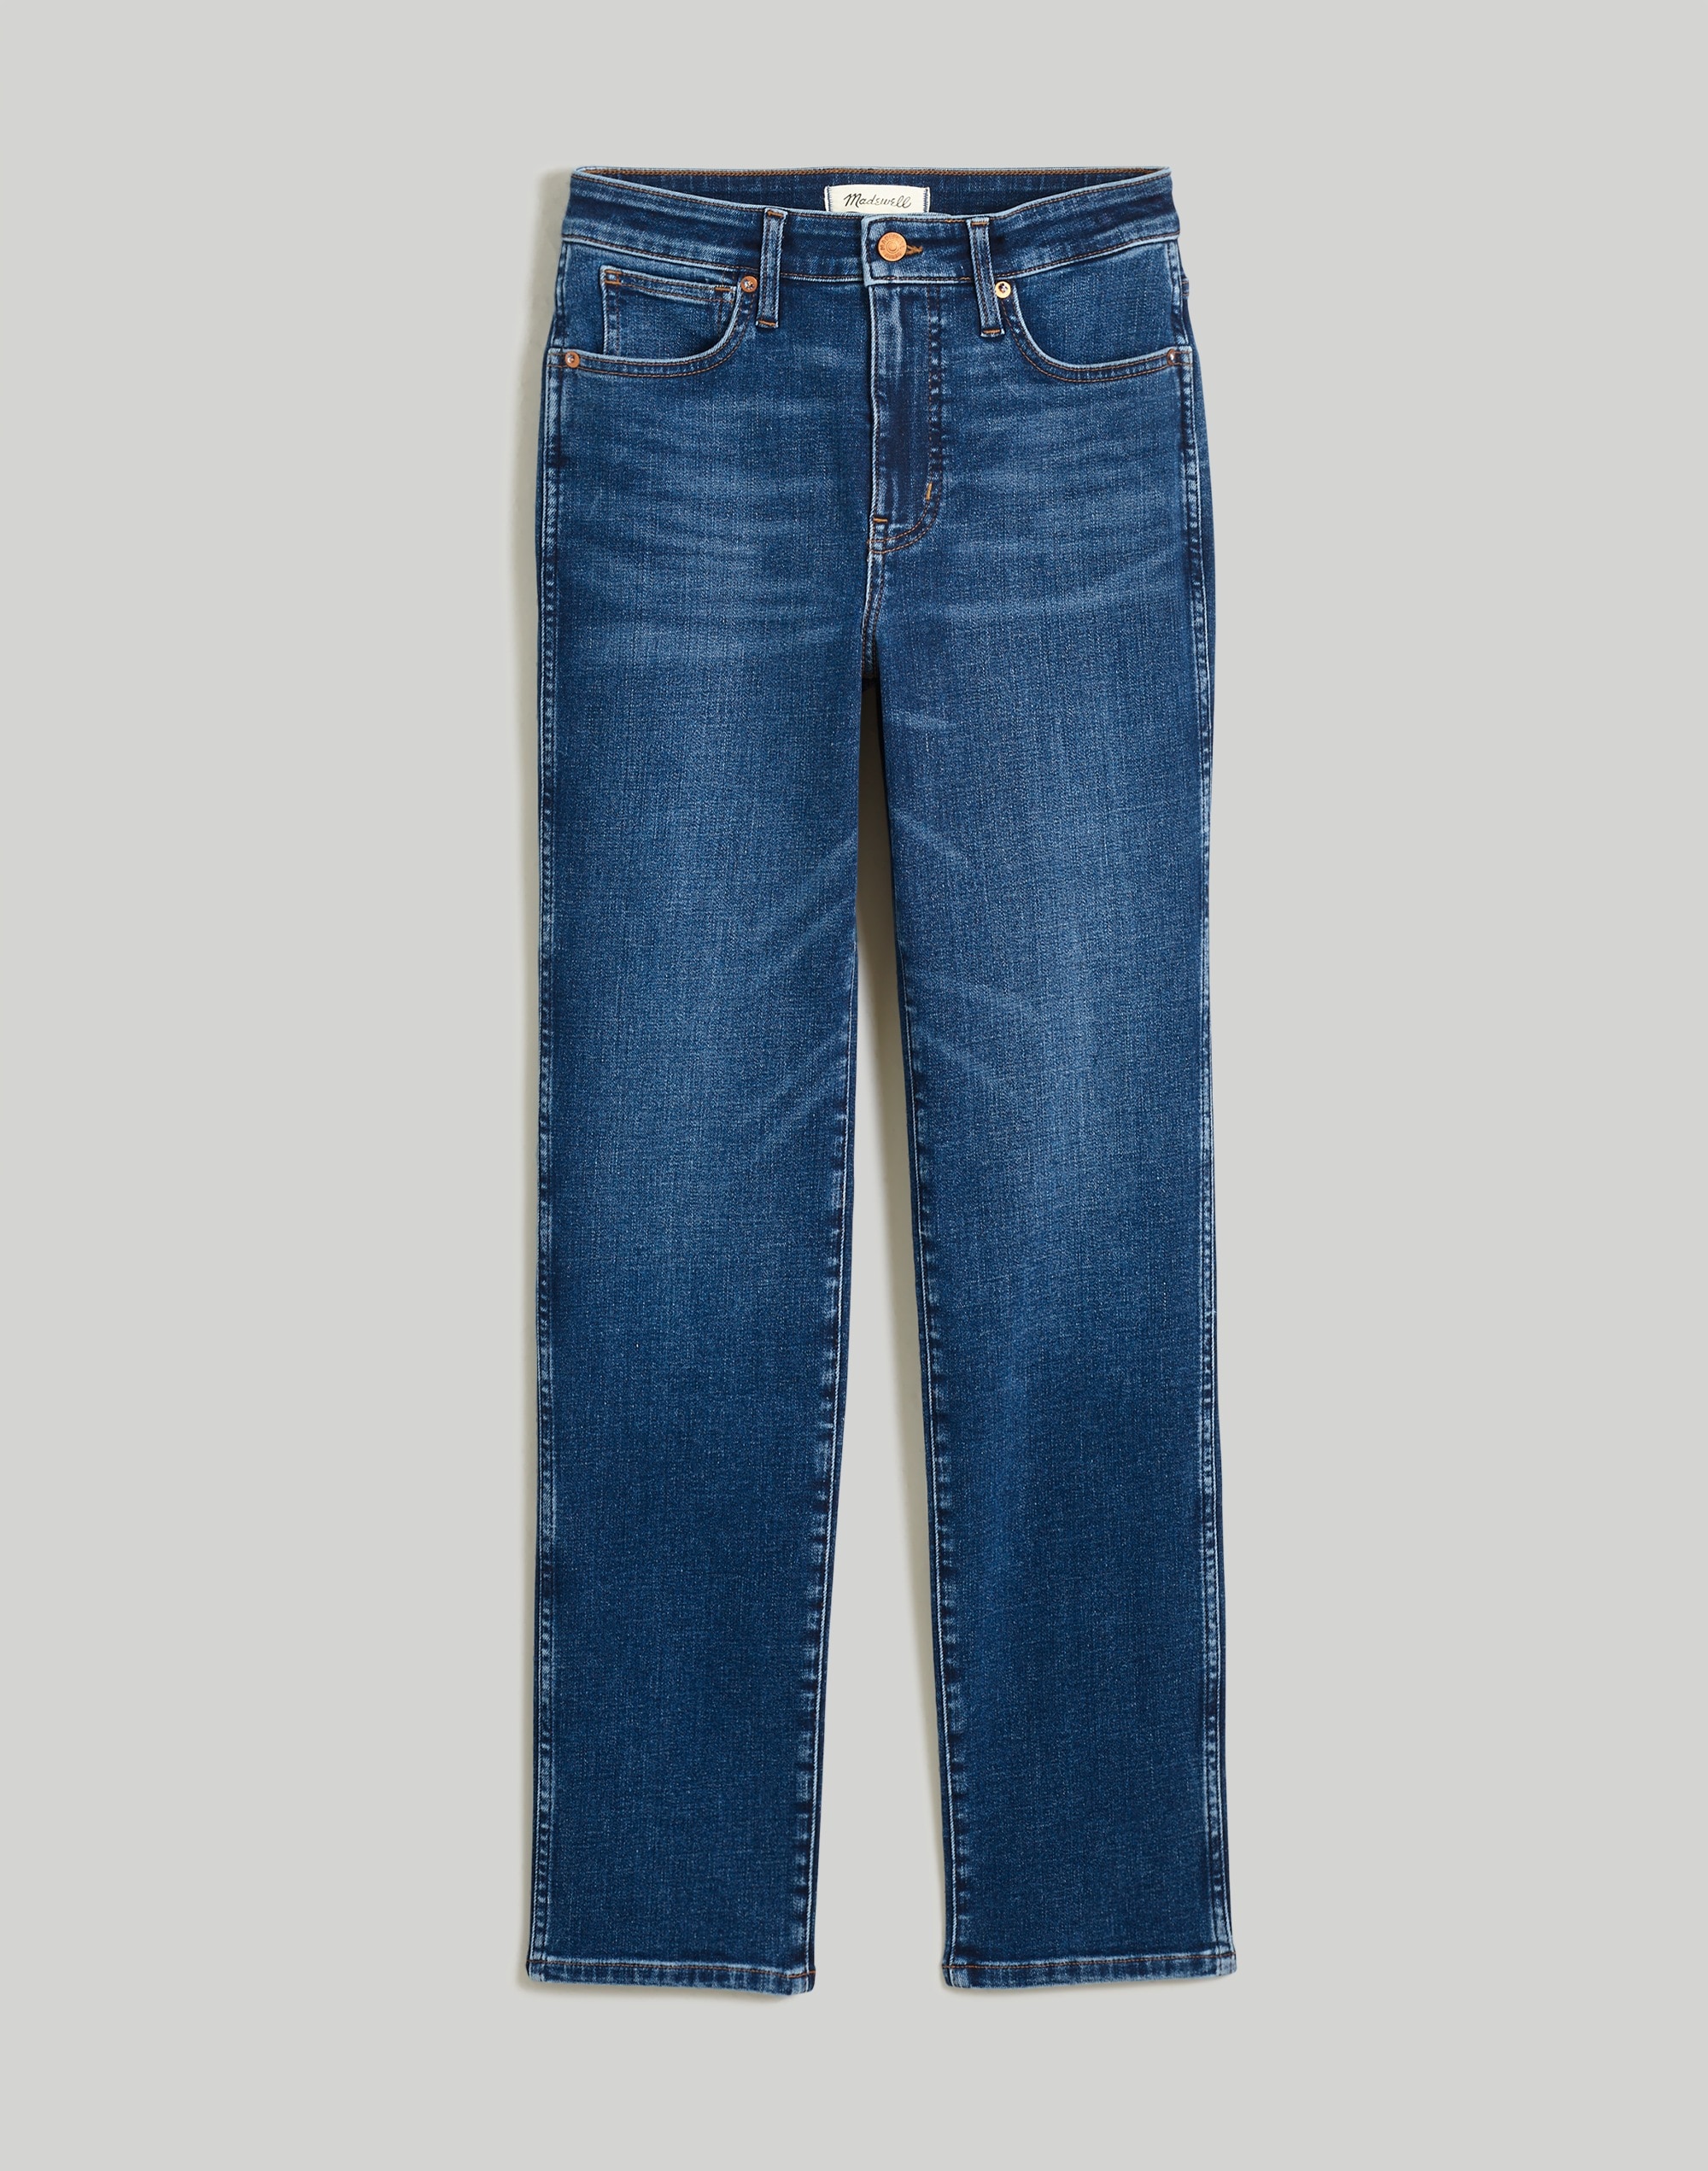 Tall Curvy Stovepipe Jeans Pendleton Wash